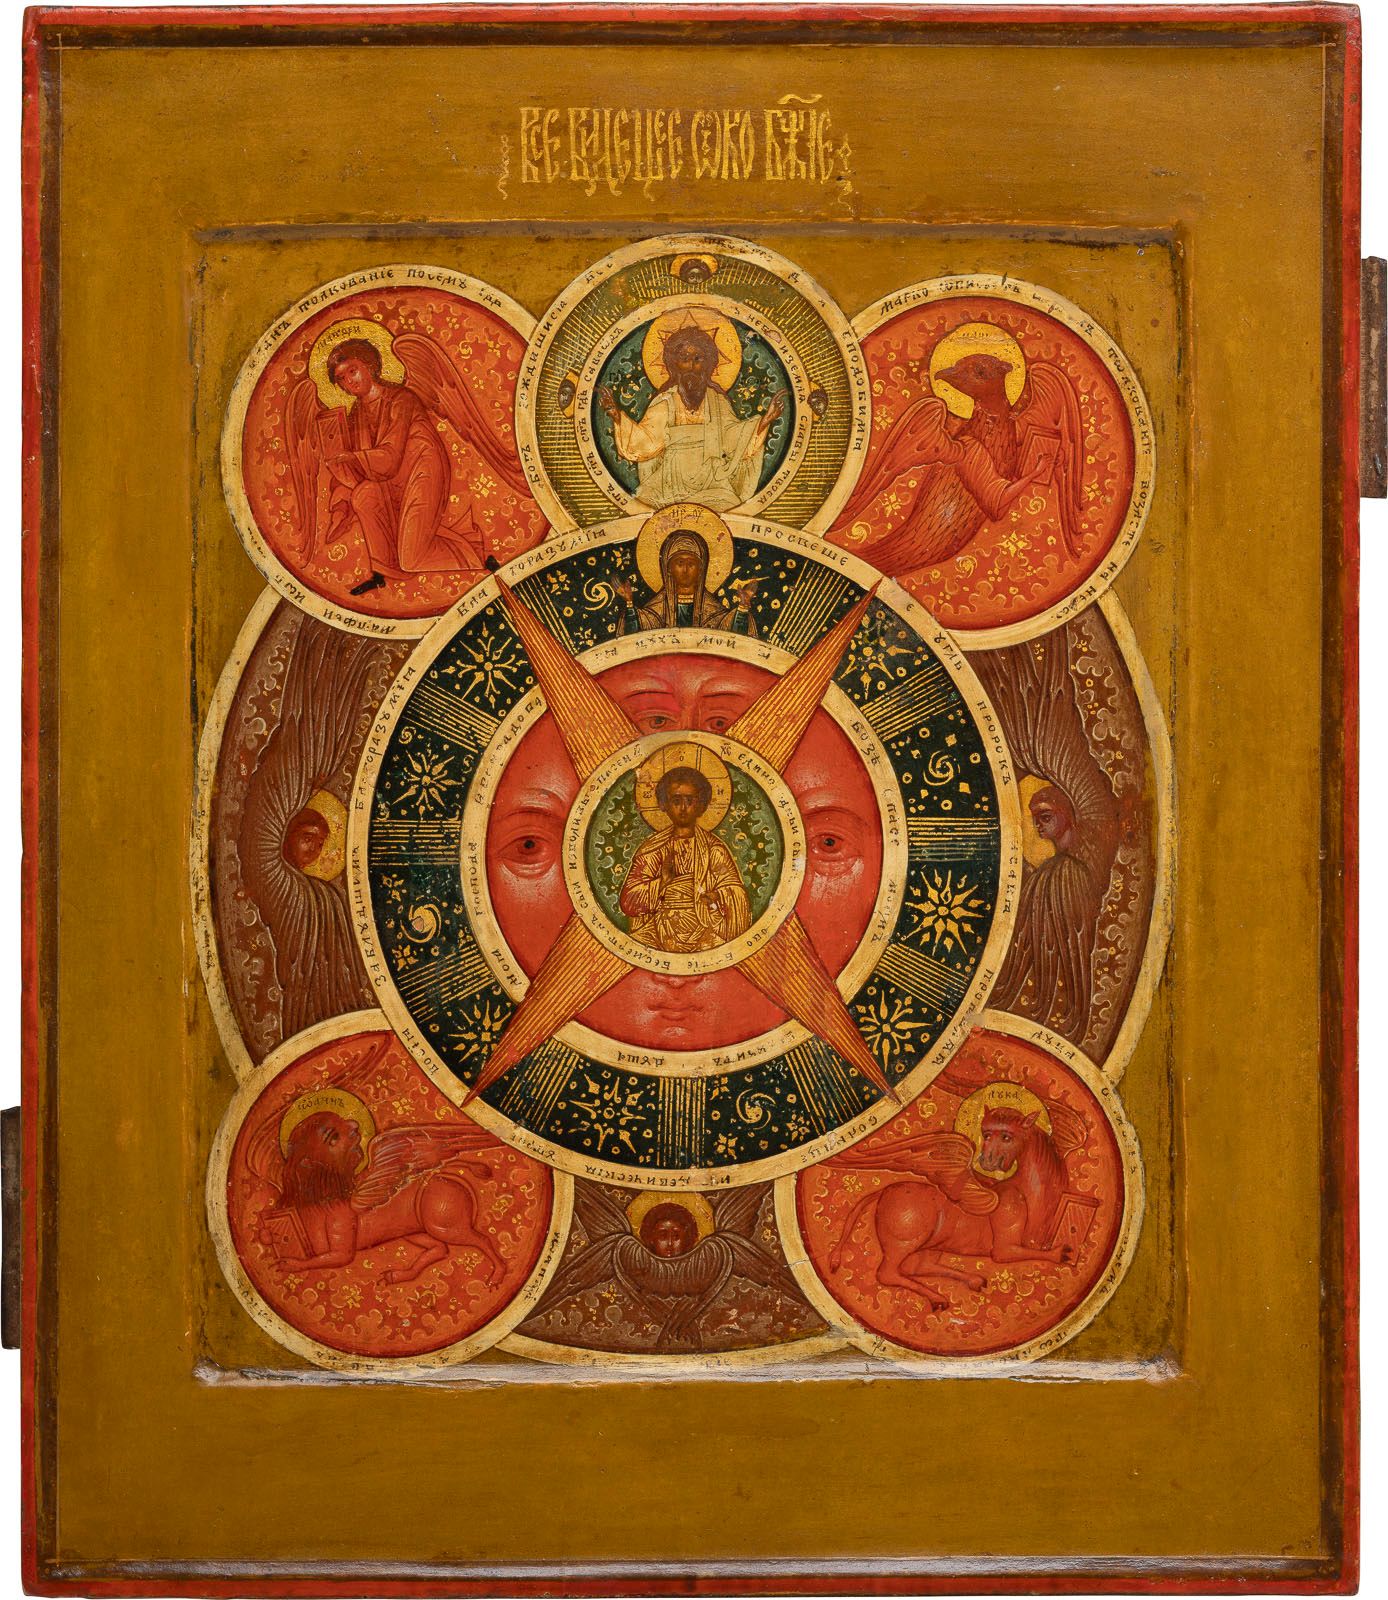 A FINE ICON SHOWING THE 'ALL-SEEING EYE OF GOD' UNA FINE ICONA CHE MOSTRA L'OCCH&hellip;